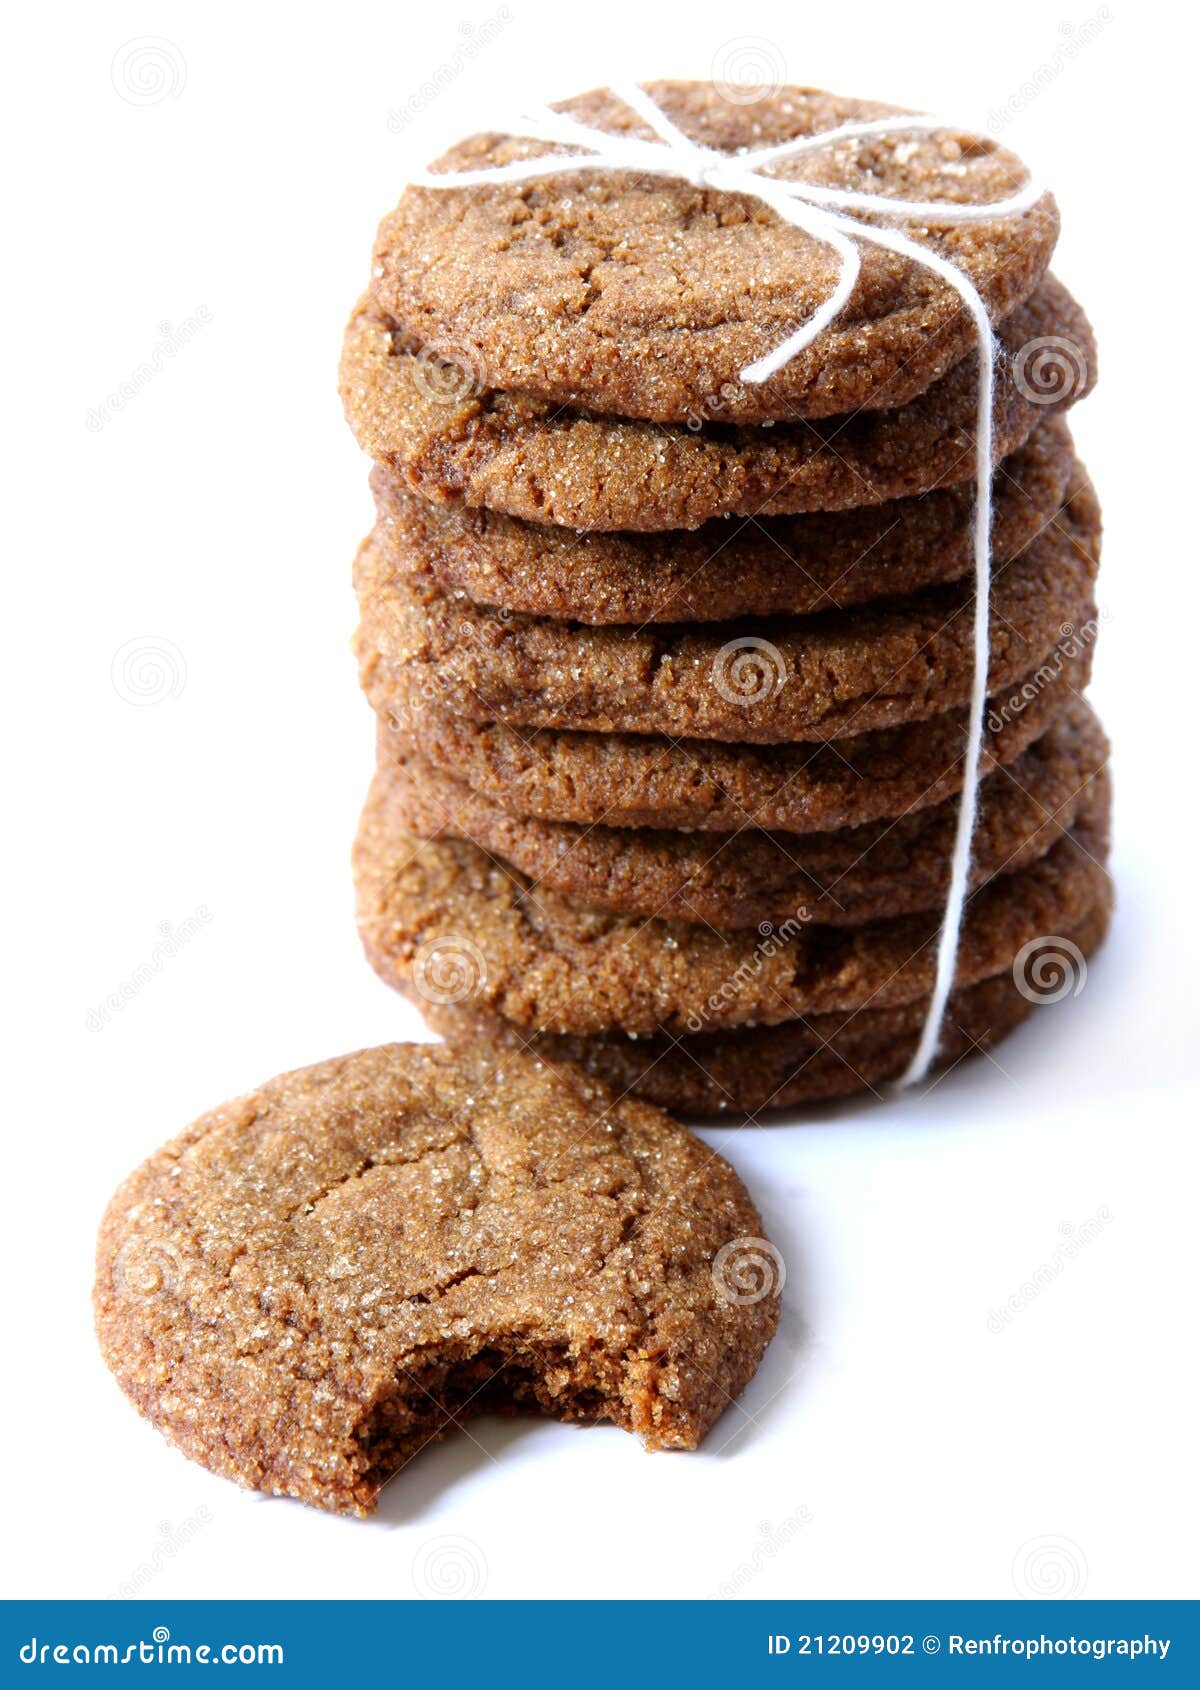 ginger snaps tied with twine